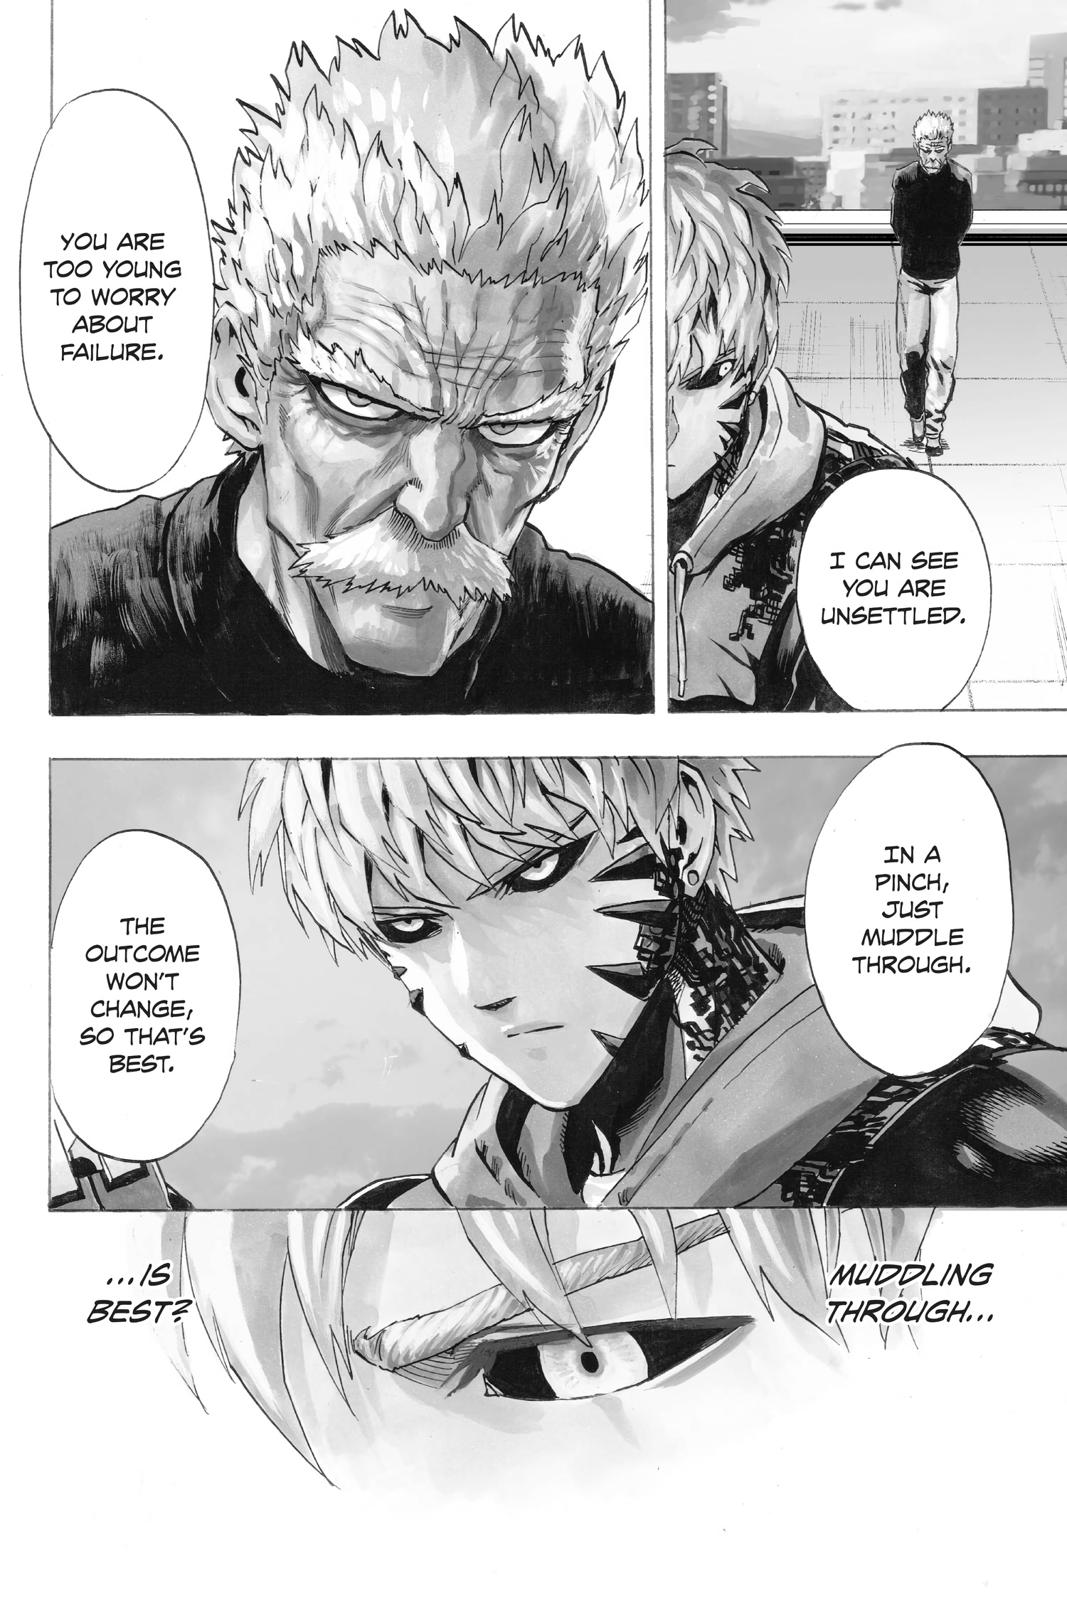 One-Punch Man, Punch 21 image 46